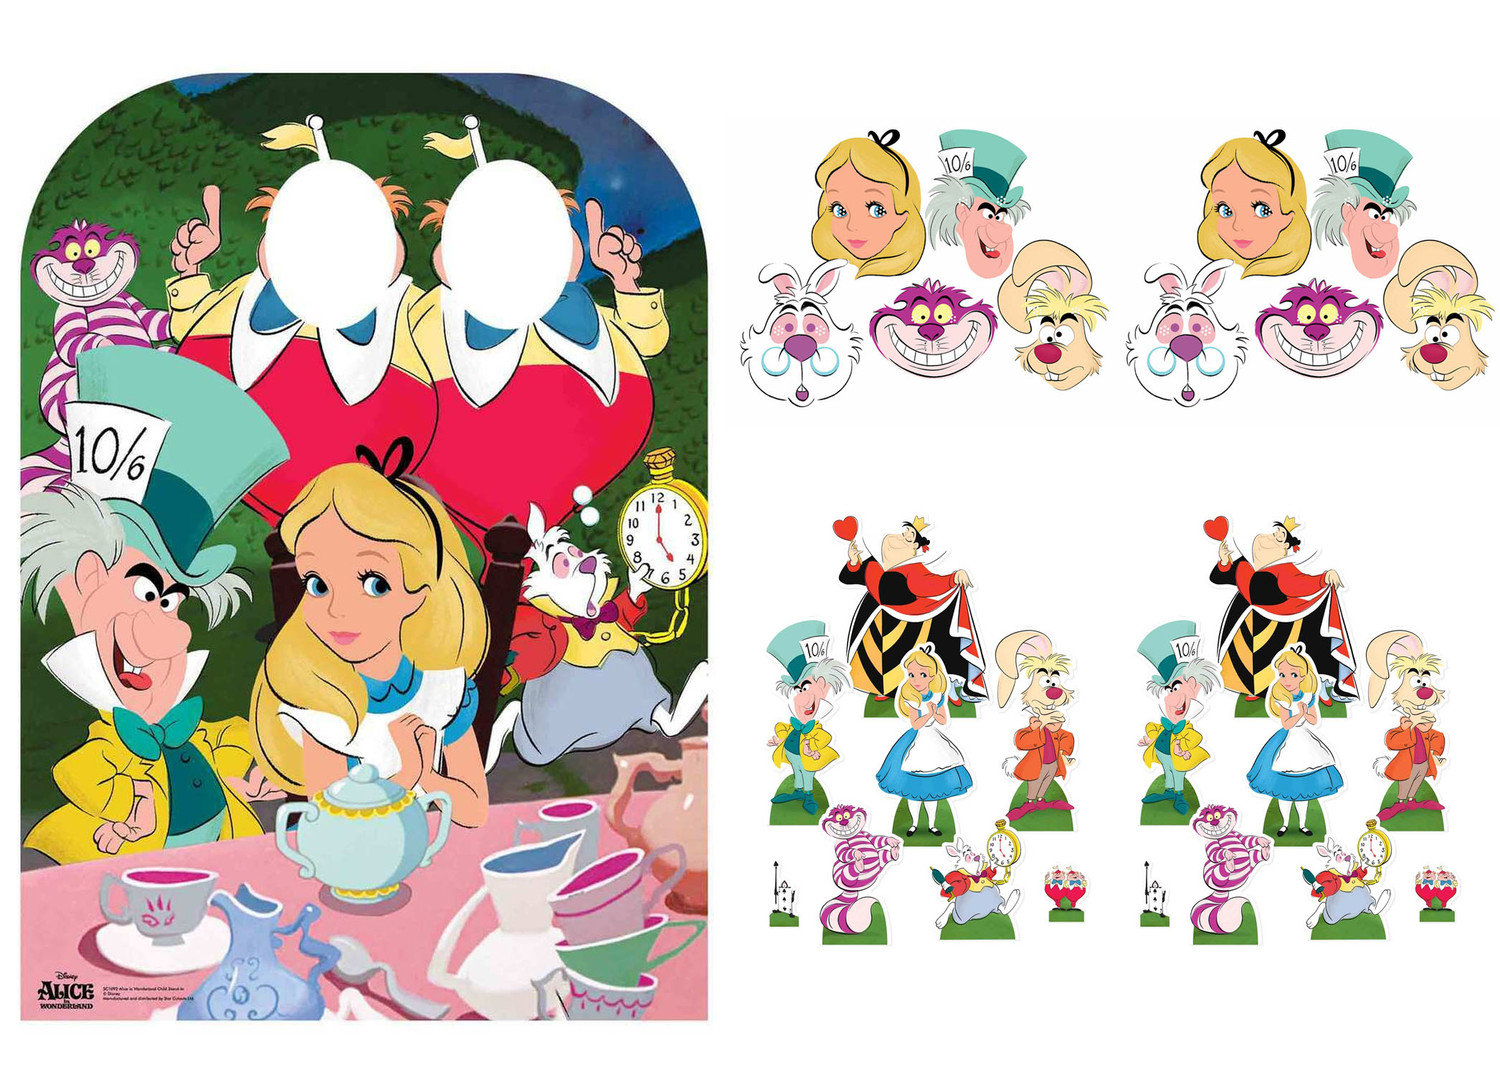 https://cdn11.bigcommerce.com/s-ydriczk/images/stencil/1500x1500/products/89572/95397/Disney-Alice-in-Wonderland-party-pack-includes-cardboard-cutout-masks-and-table-top-decorations-buy-now-at-starstills__29977.1629800363.jpg?c=2&imbypass=on